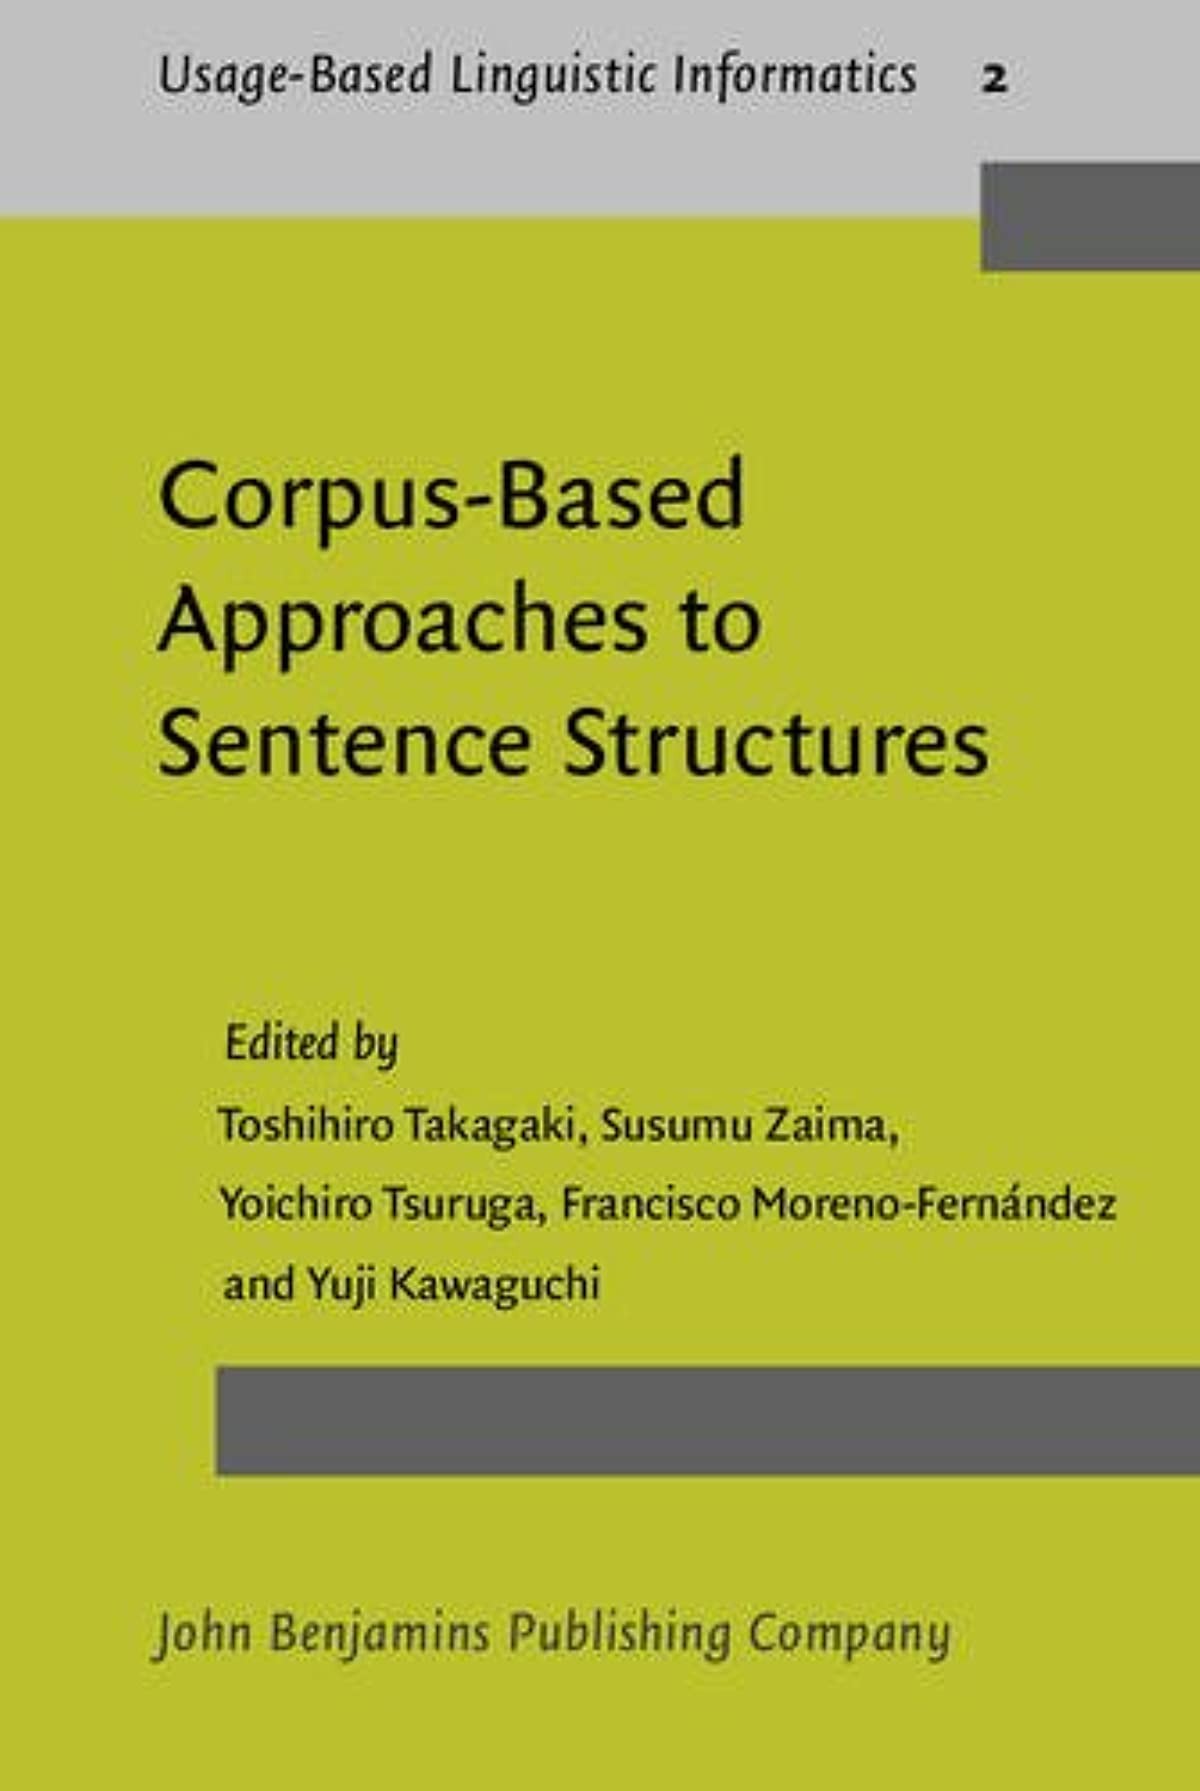 Corpus-Based Approaches to Sentence Structures